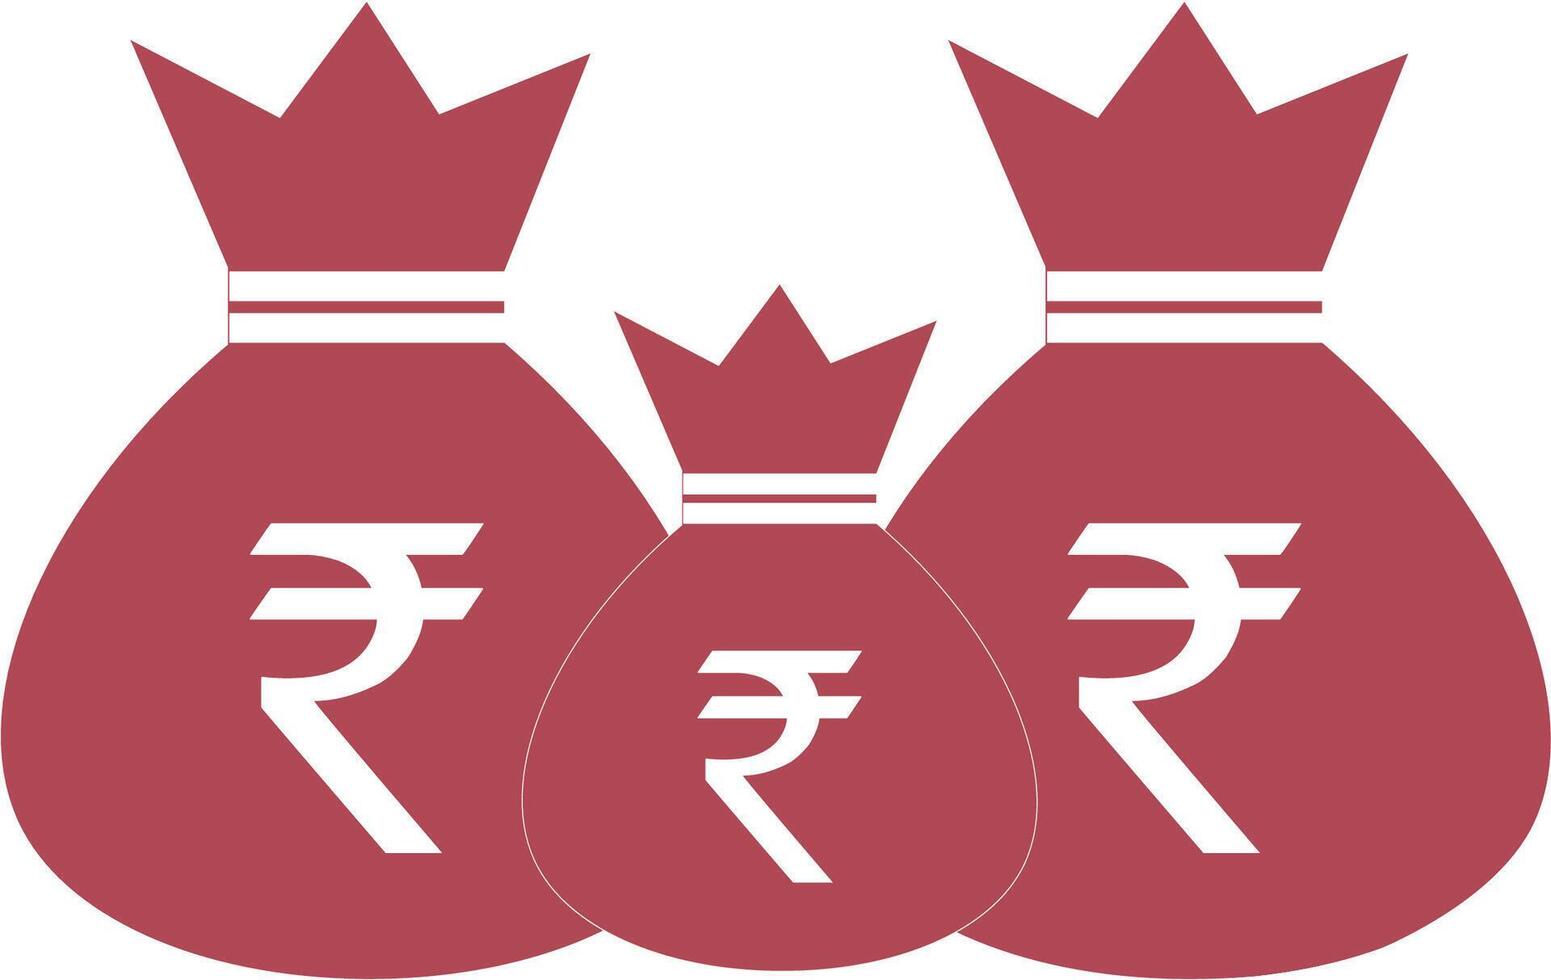 Gold Coins Stack With Rupee Currency Sign. Indian Cash Financial symbol. Modern vector economy.